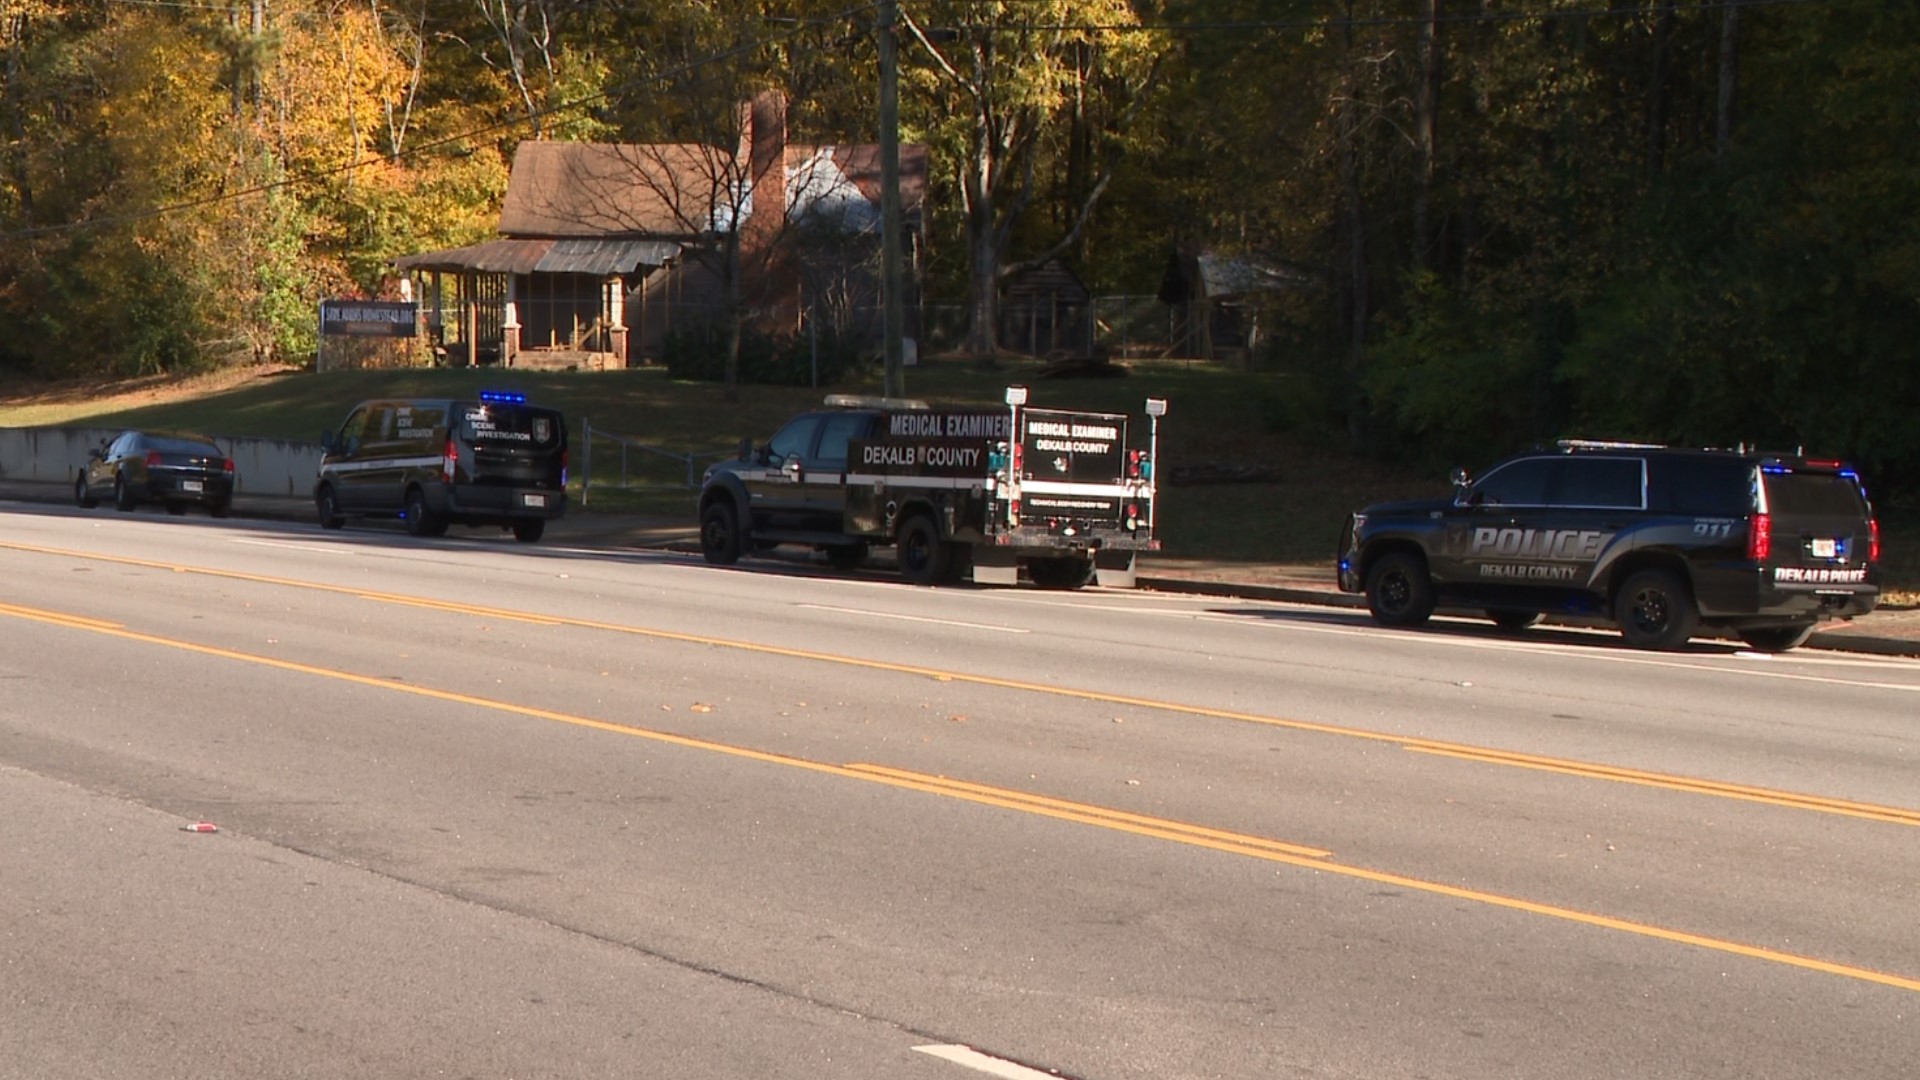 DeKalb County Police are investigating after they said human remains were found near a church in Tucker Friday afternoon.